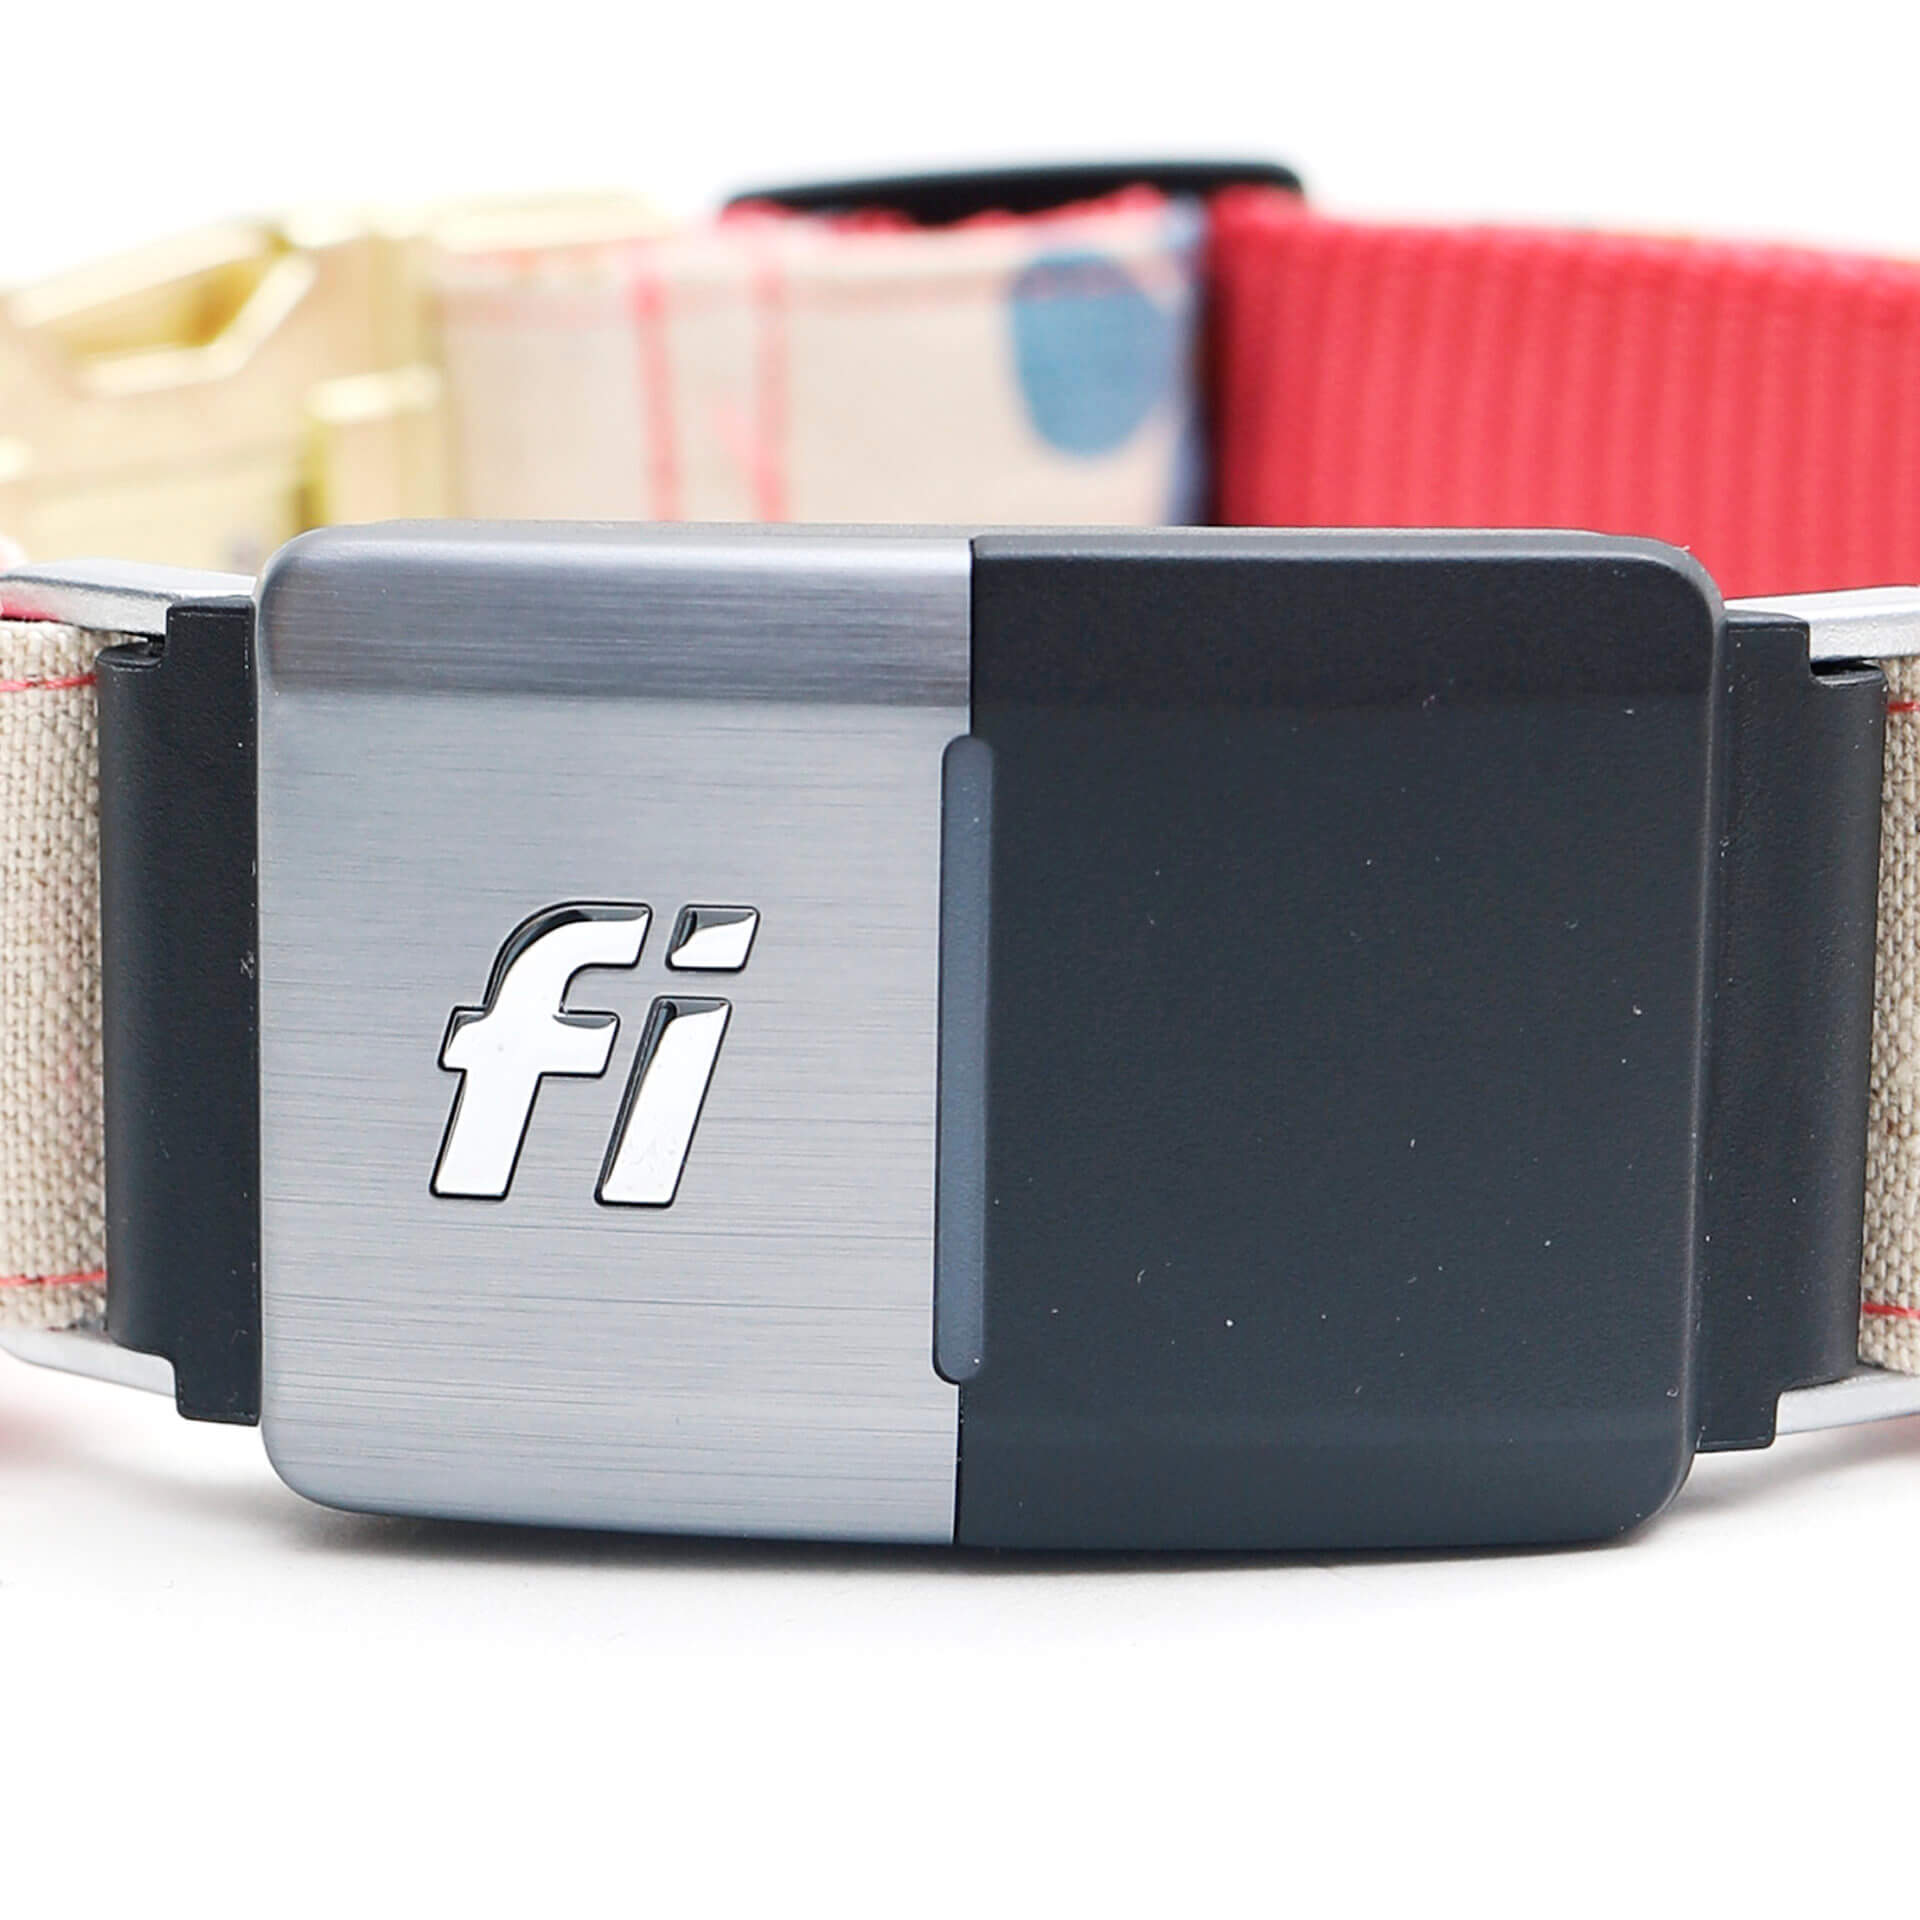 Make your collar Fi compatible